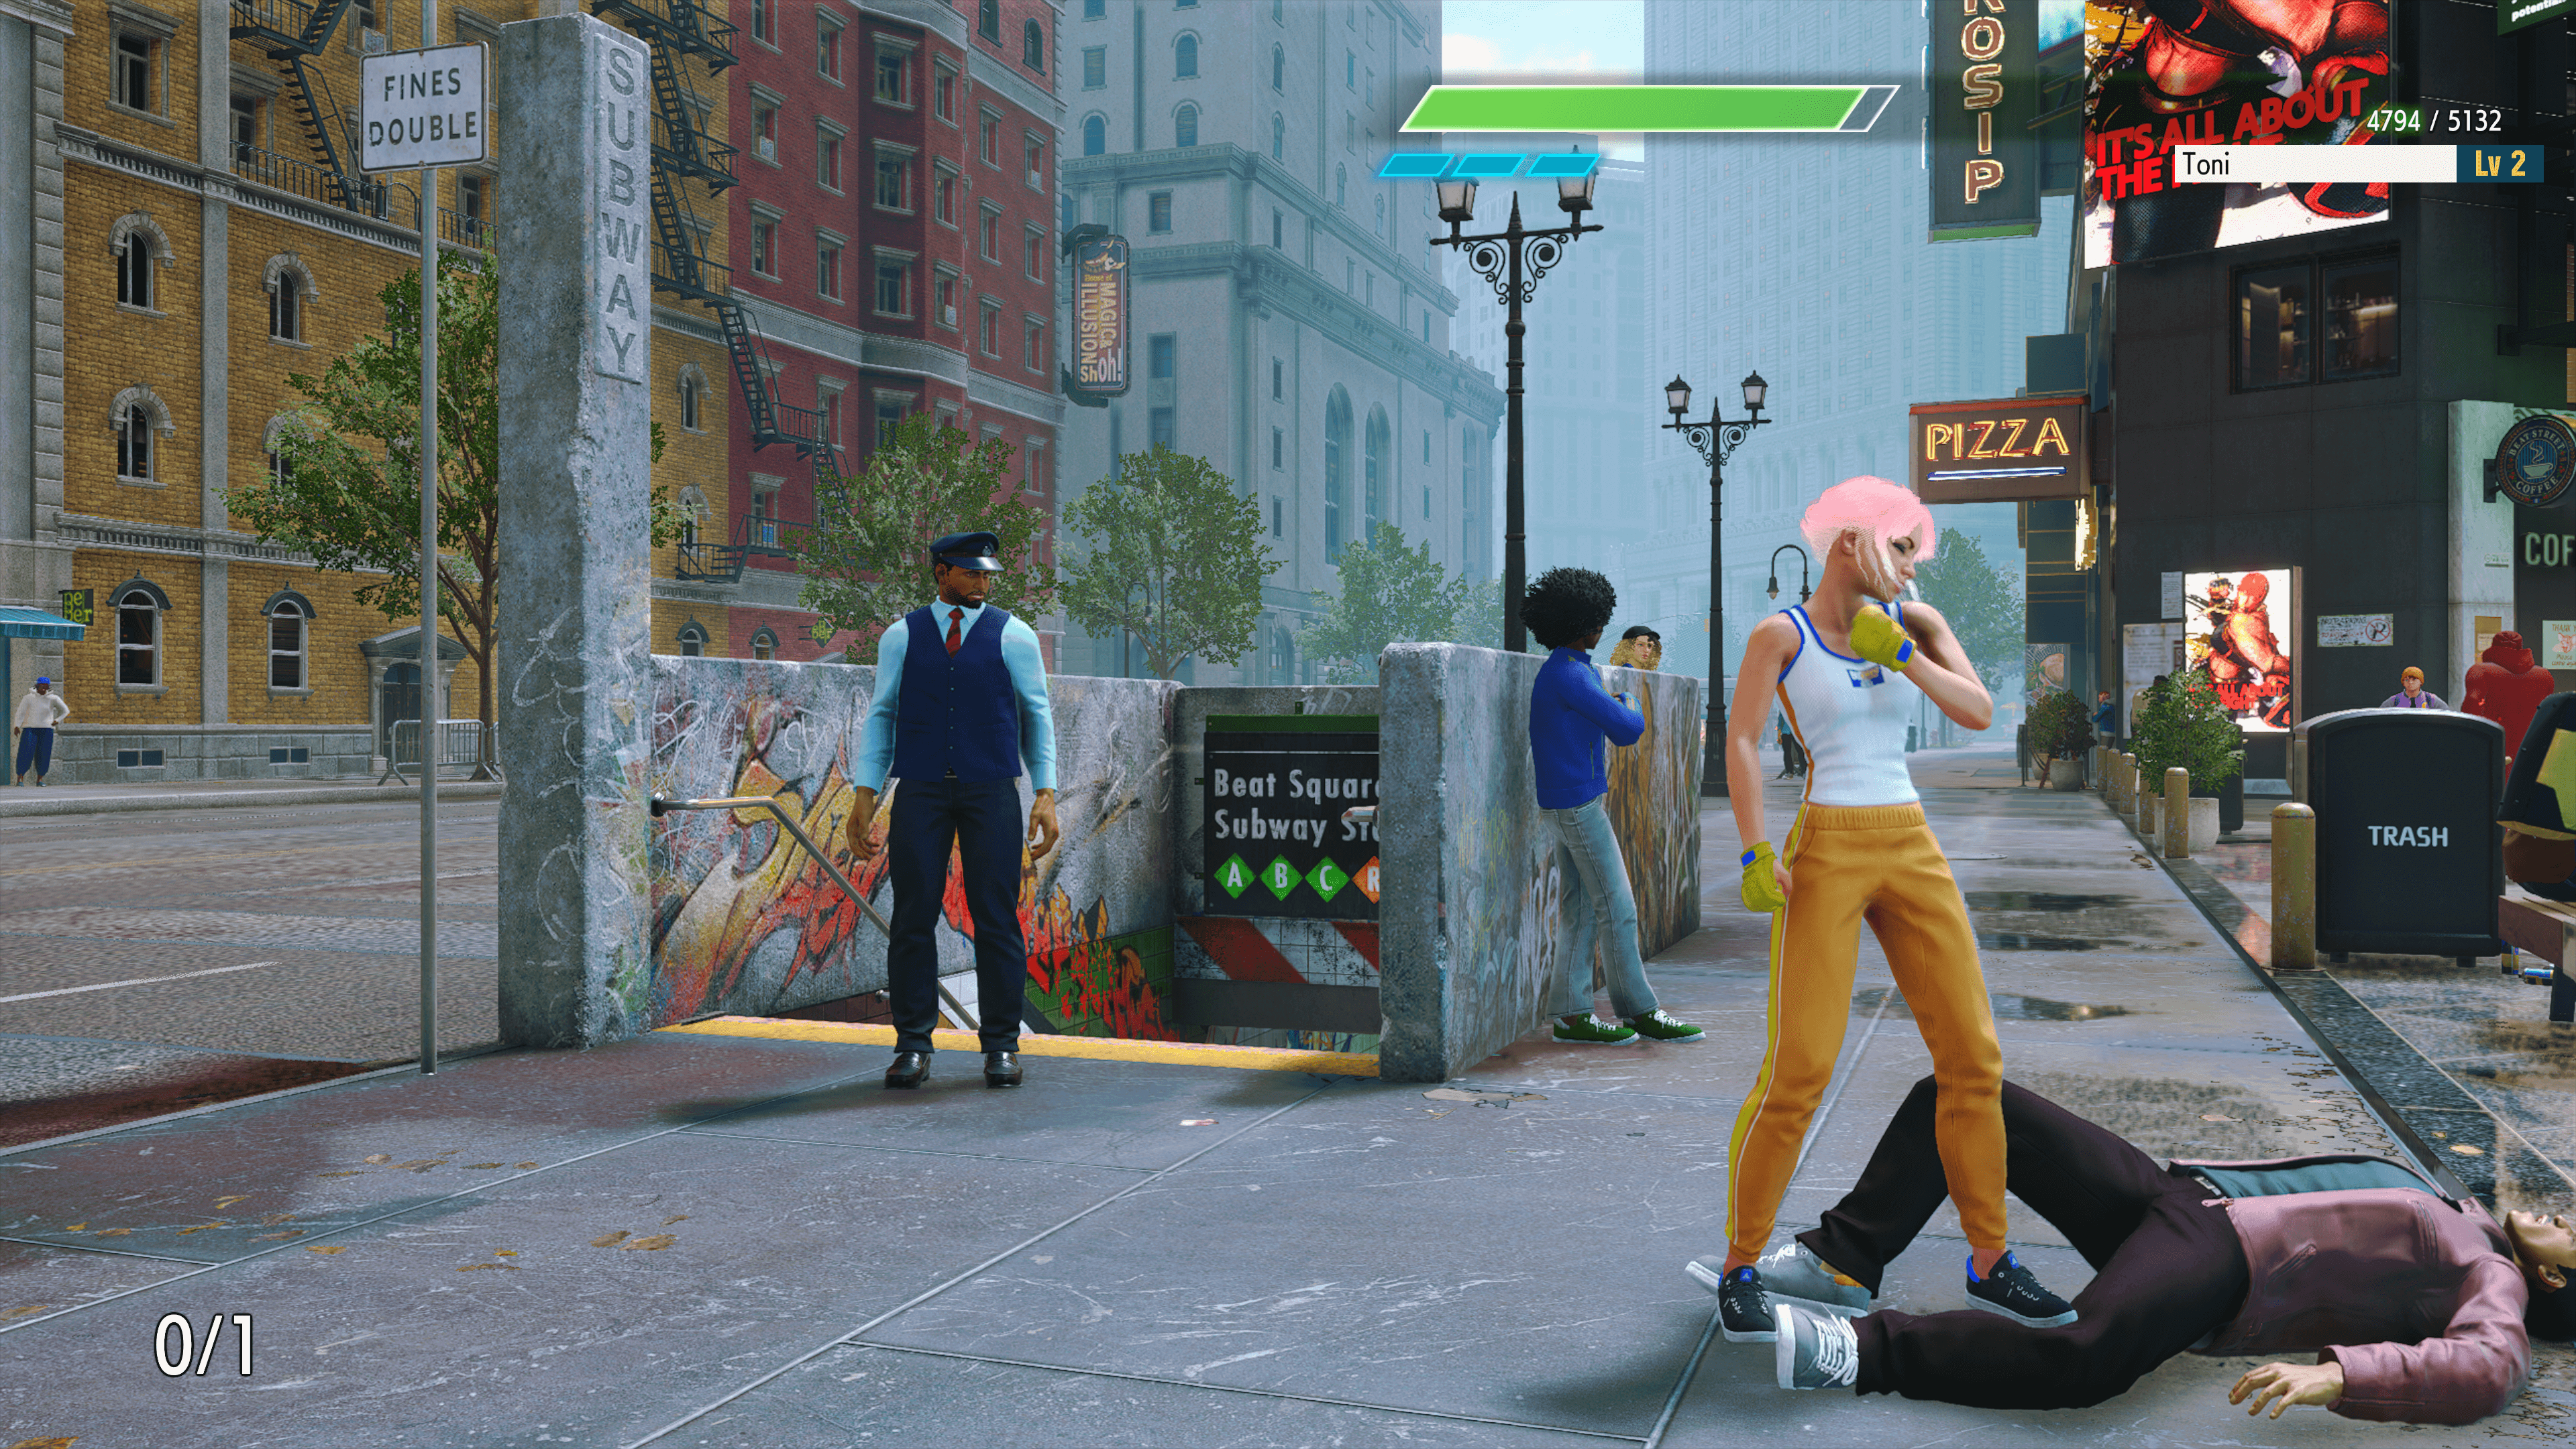 A city scene from Street Fighter 6 character with pink hair wearing yellow bottoms, a white vest with blue trim and yellow fighting gloves stands over a character lying on their back wearing a wine leather jacket, black jeans and blue canvas trainers with white soles. Behind them is an entrance to a subway station with graffiti on the concrete along the stairway where the handrail runs down.